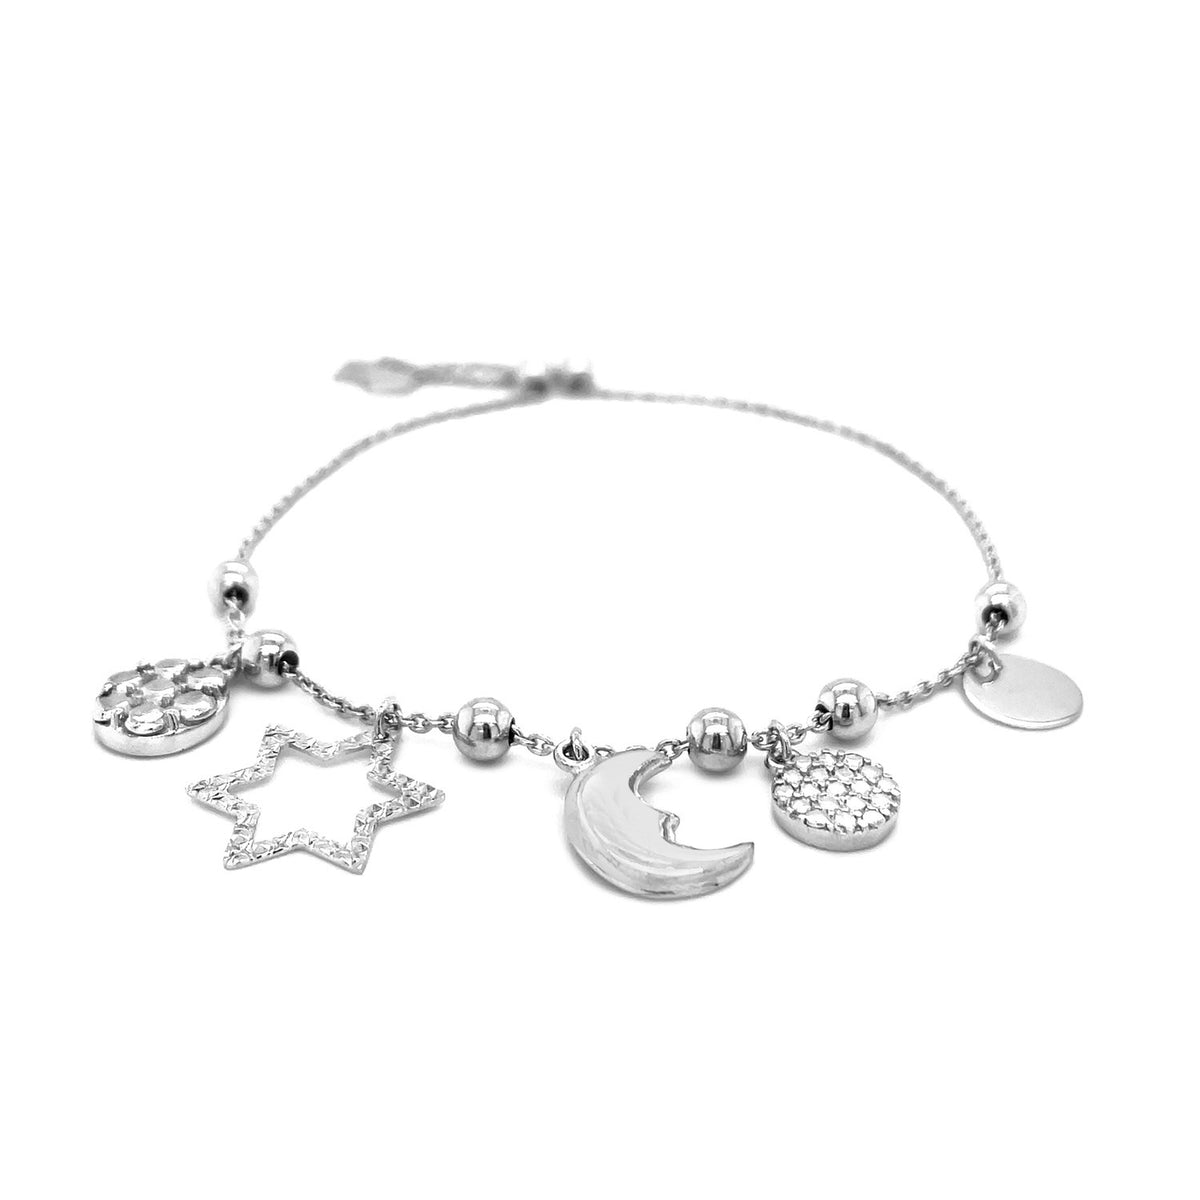 Adjustable Bead Bracelet with Celestial Charms - Sterling Silver